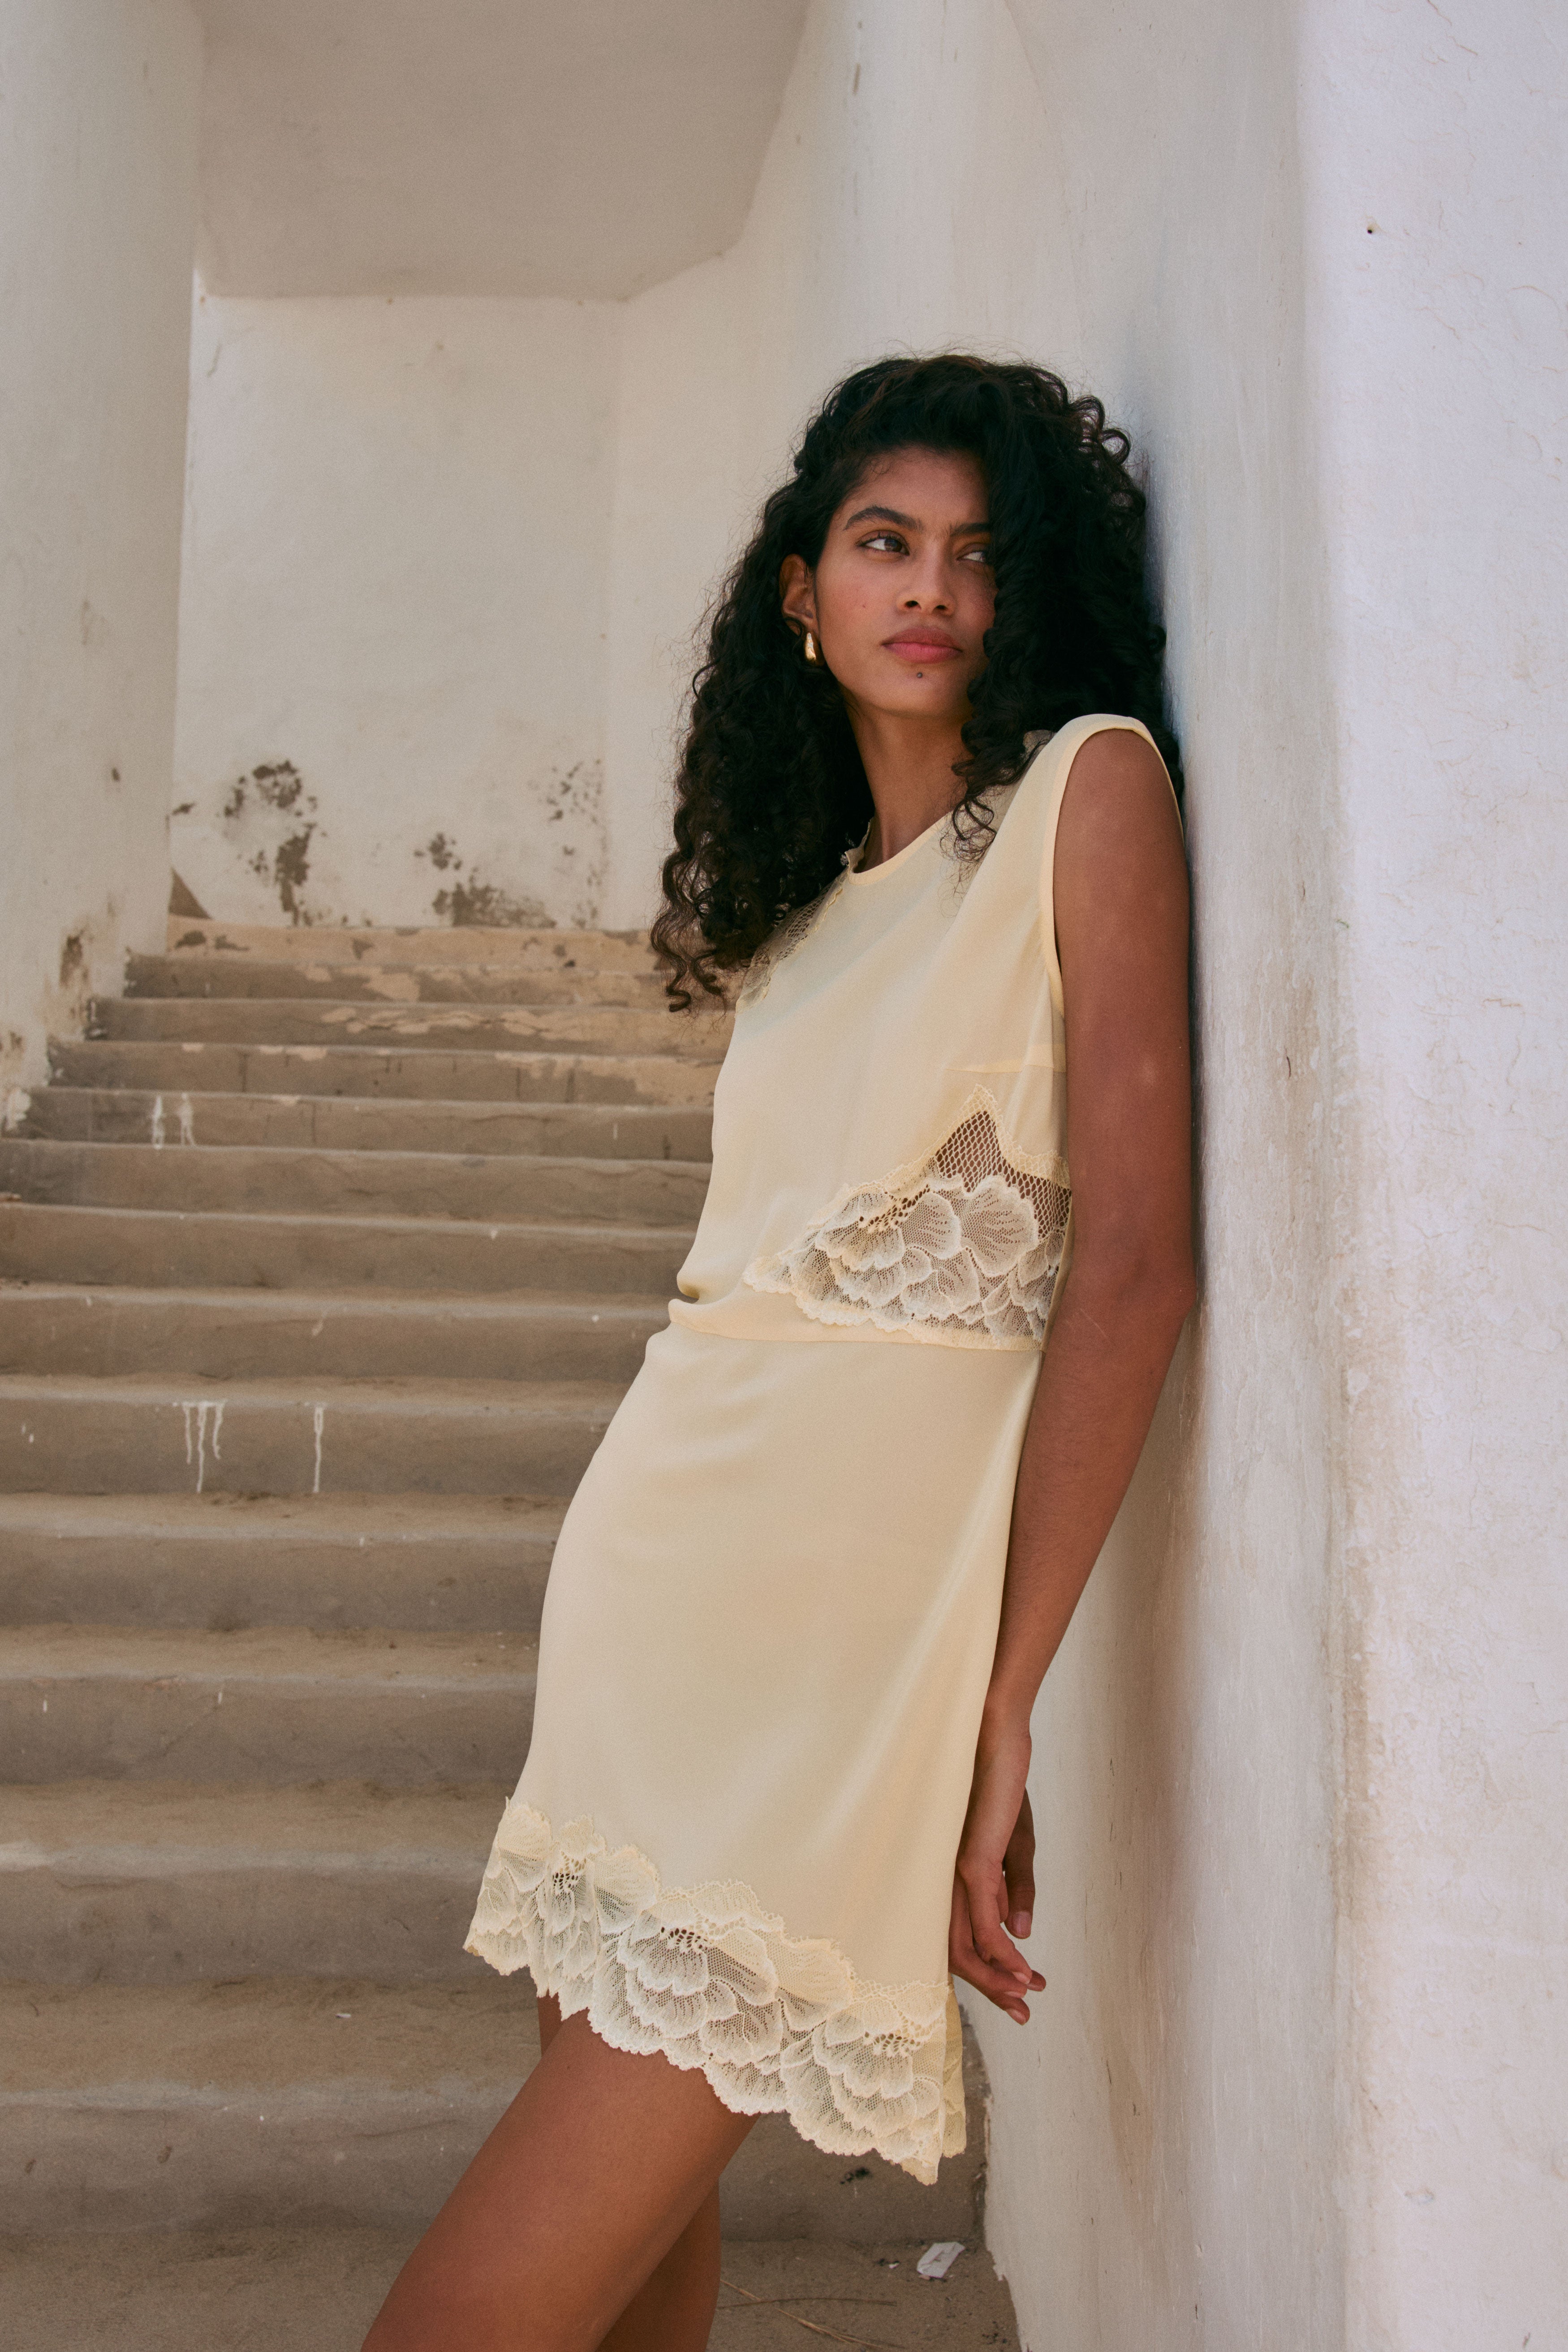 LILYSILK Official Site  Luxurious Sustainable Fashion in Silk